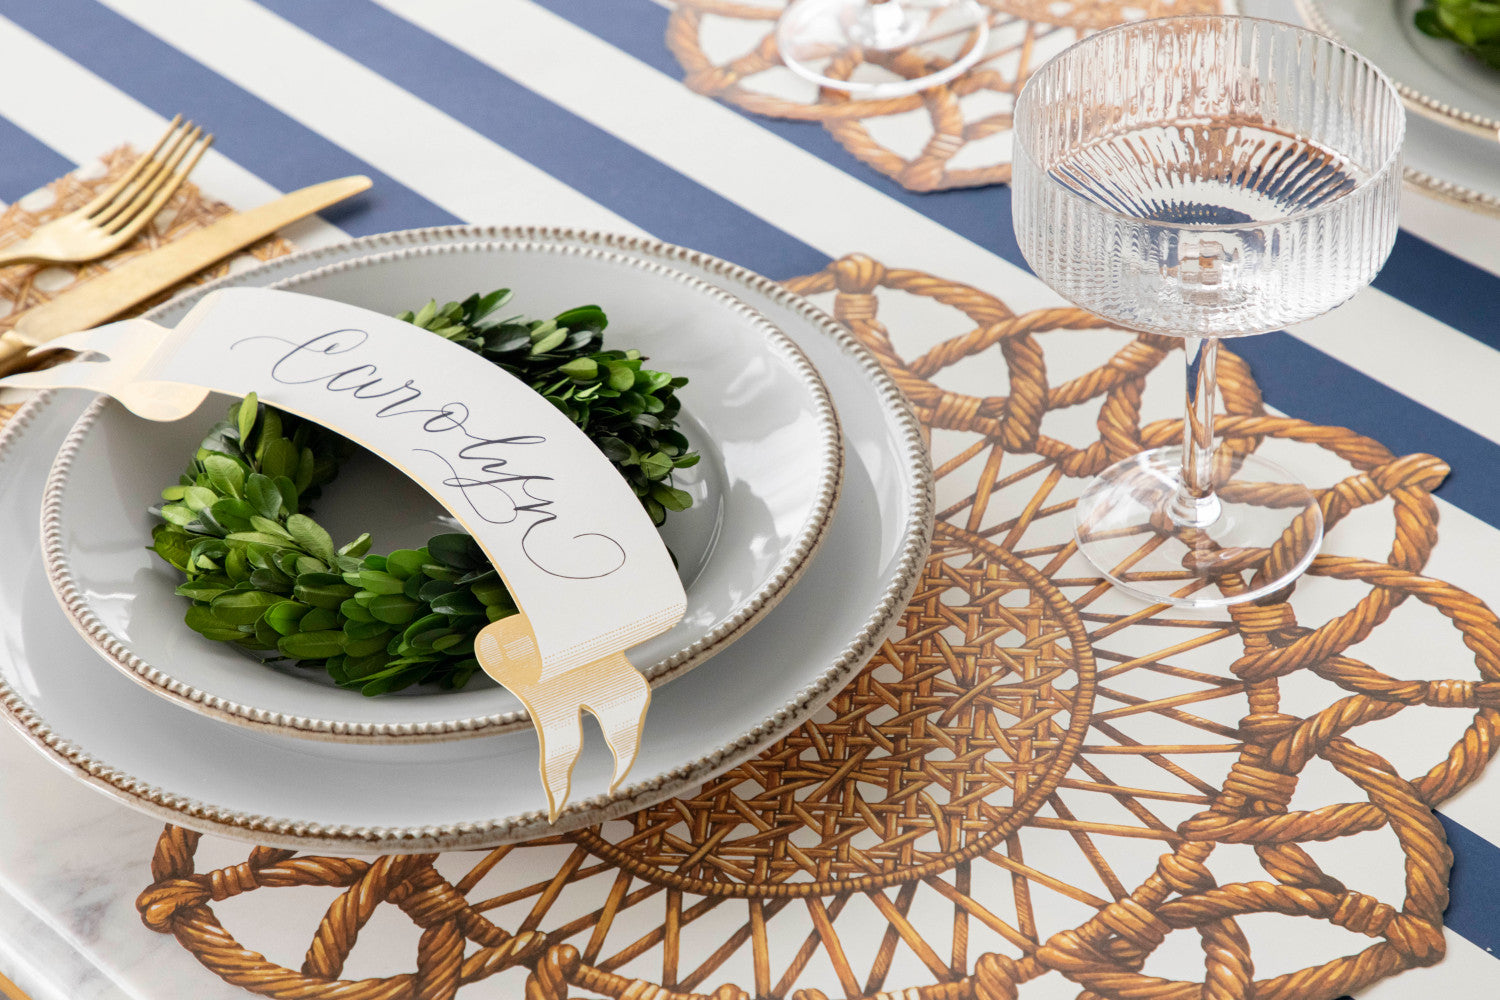 The Die-cut Rattan Weave Placemat under an elegant place setting.